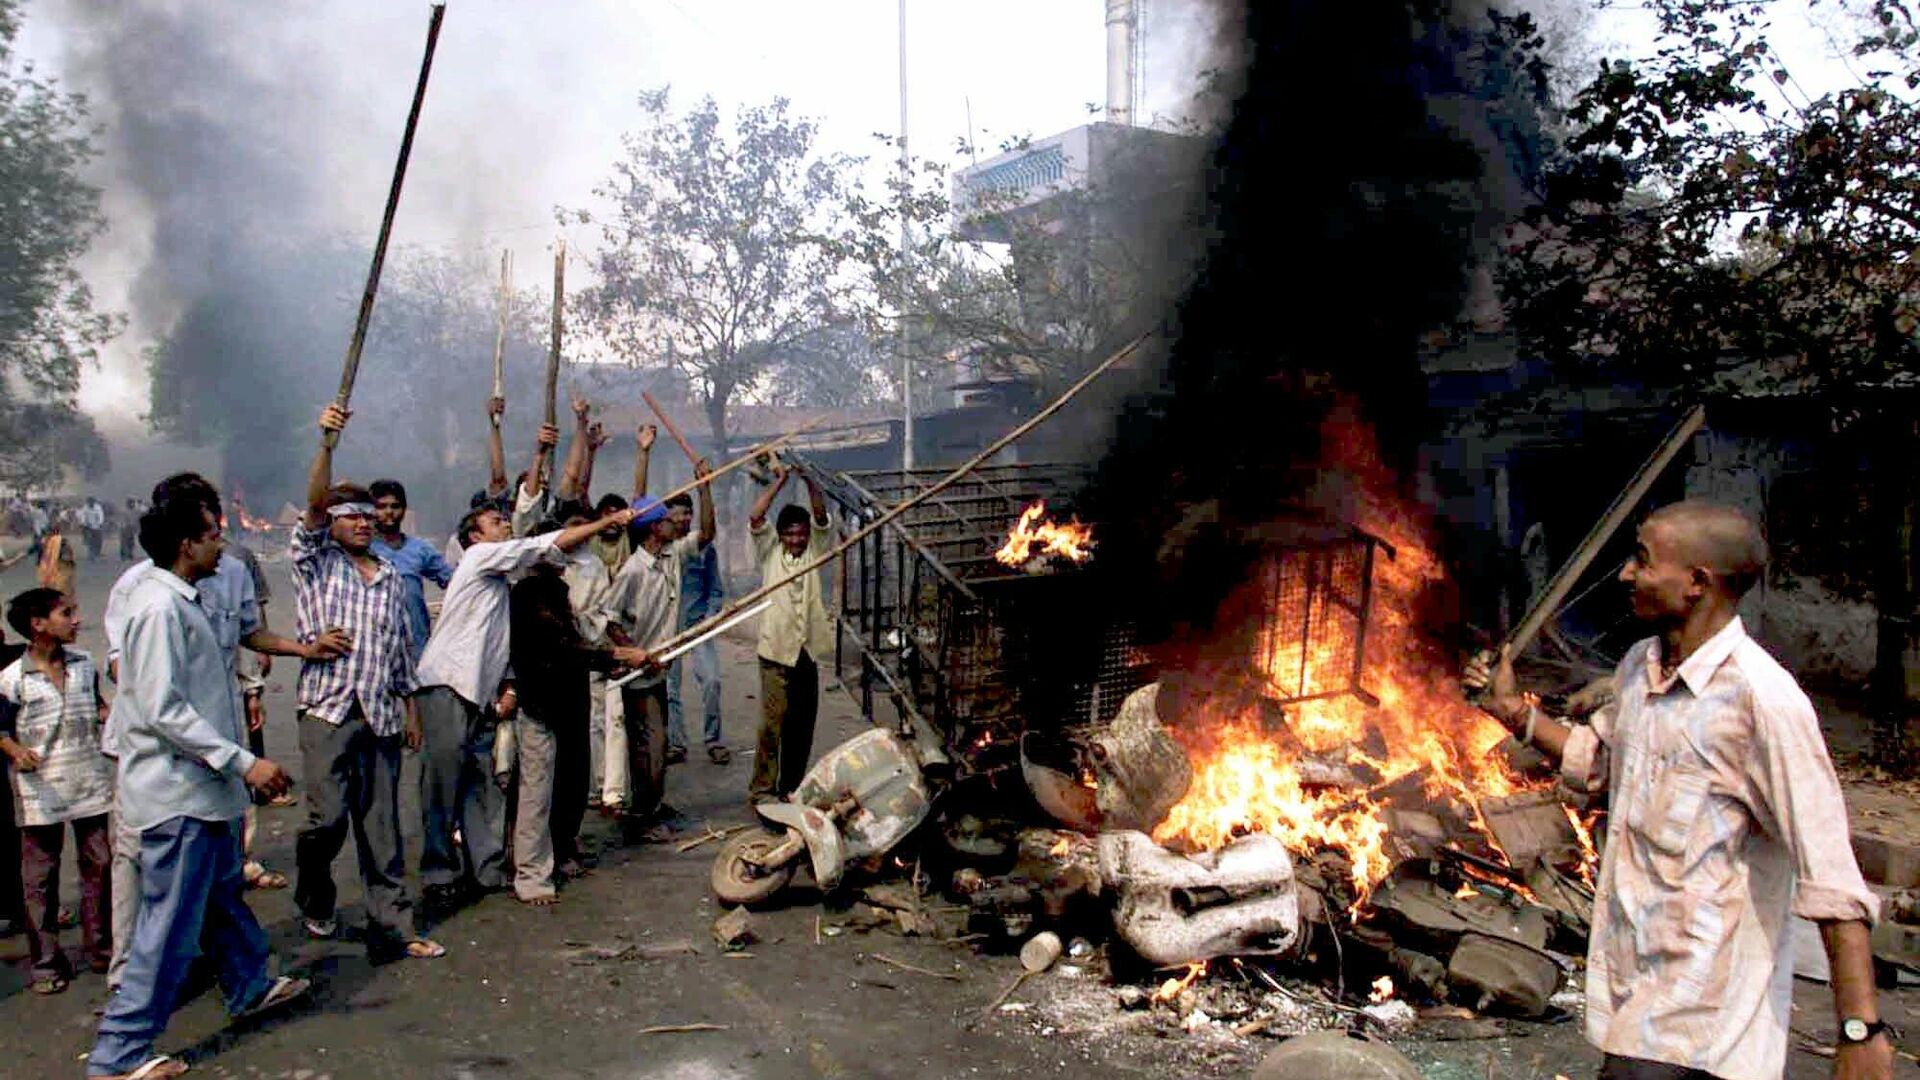 Youths burn vehicles and debris in the streets of Ahmadabad, in the Indian state of Gujarat, Thursday, Feb. 28, 2002, a day after a Muslim mob attacked a train, killing at least 58 people - Sputnik International, 1920, 10.02.2022